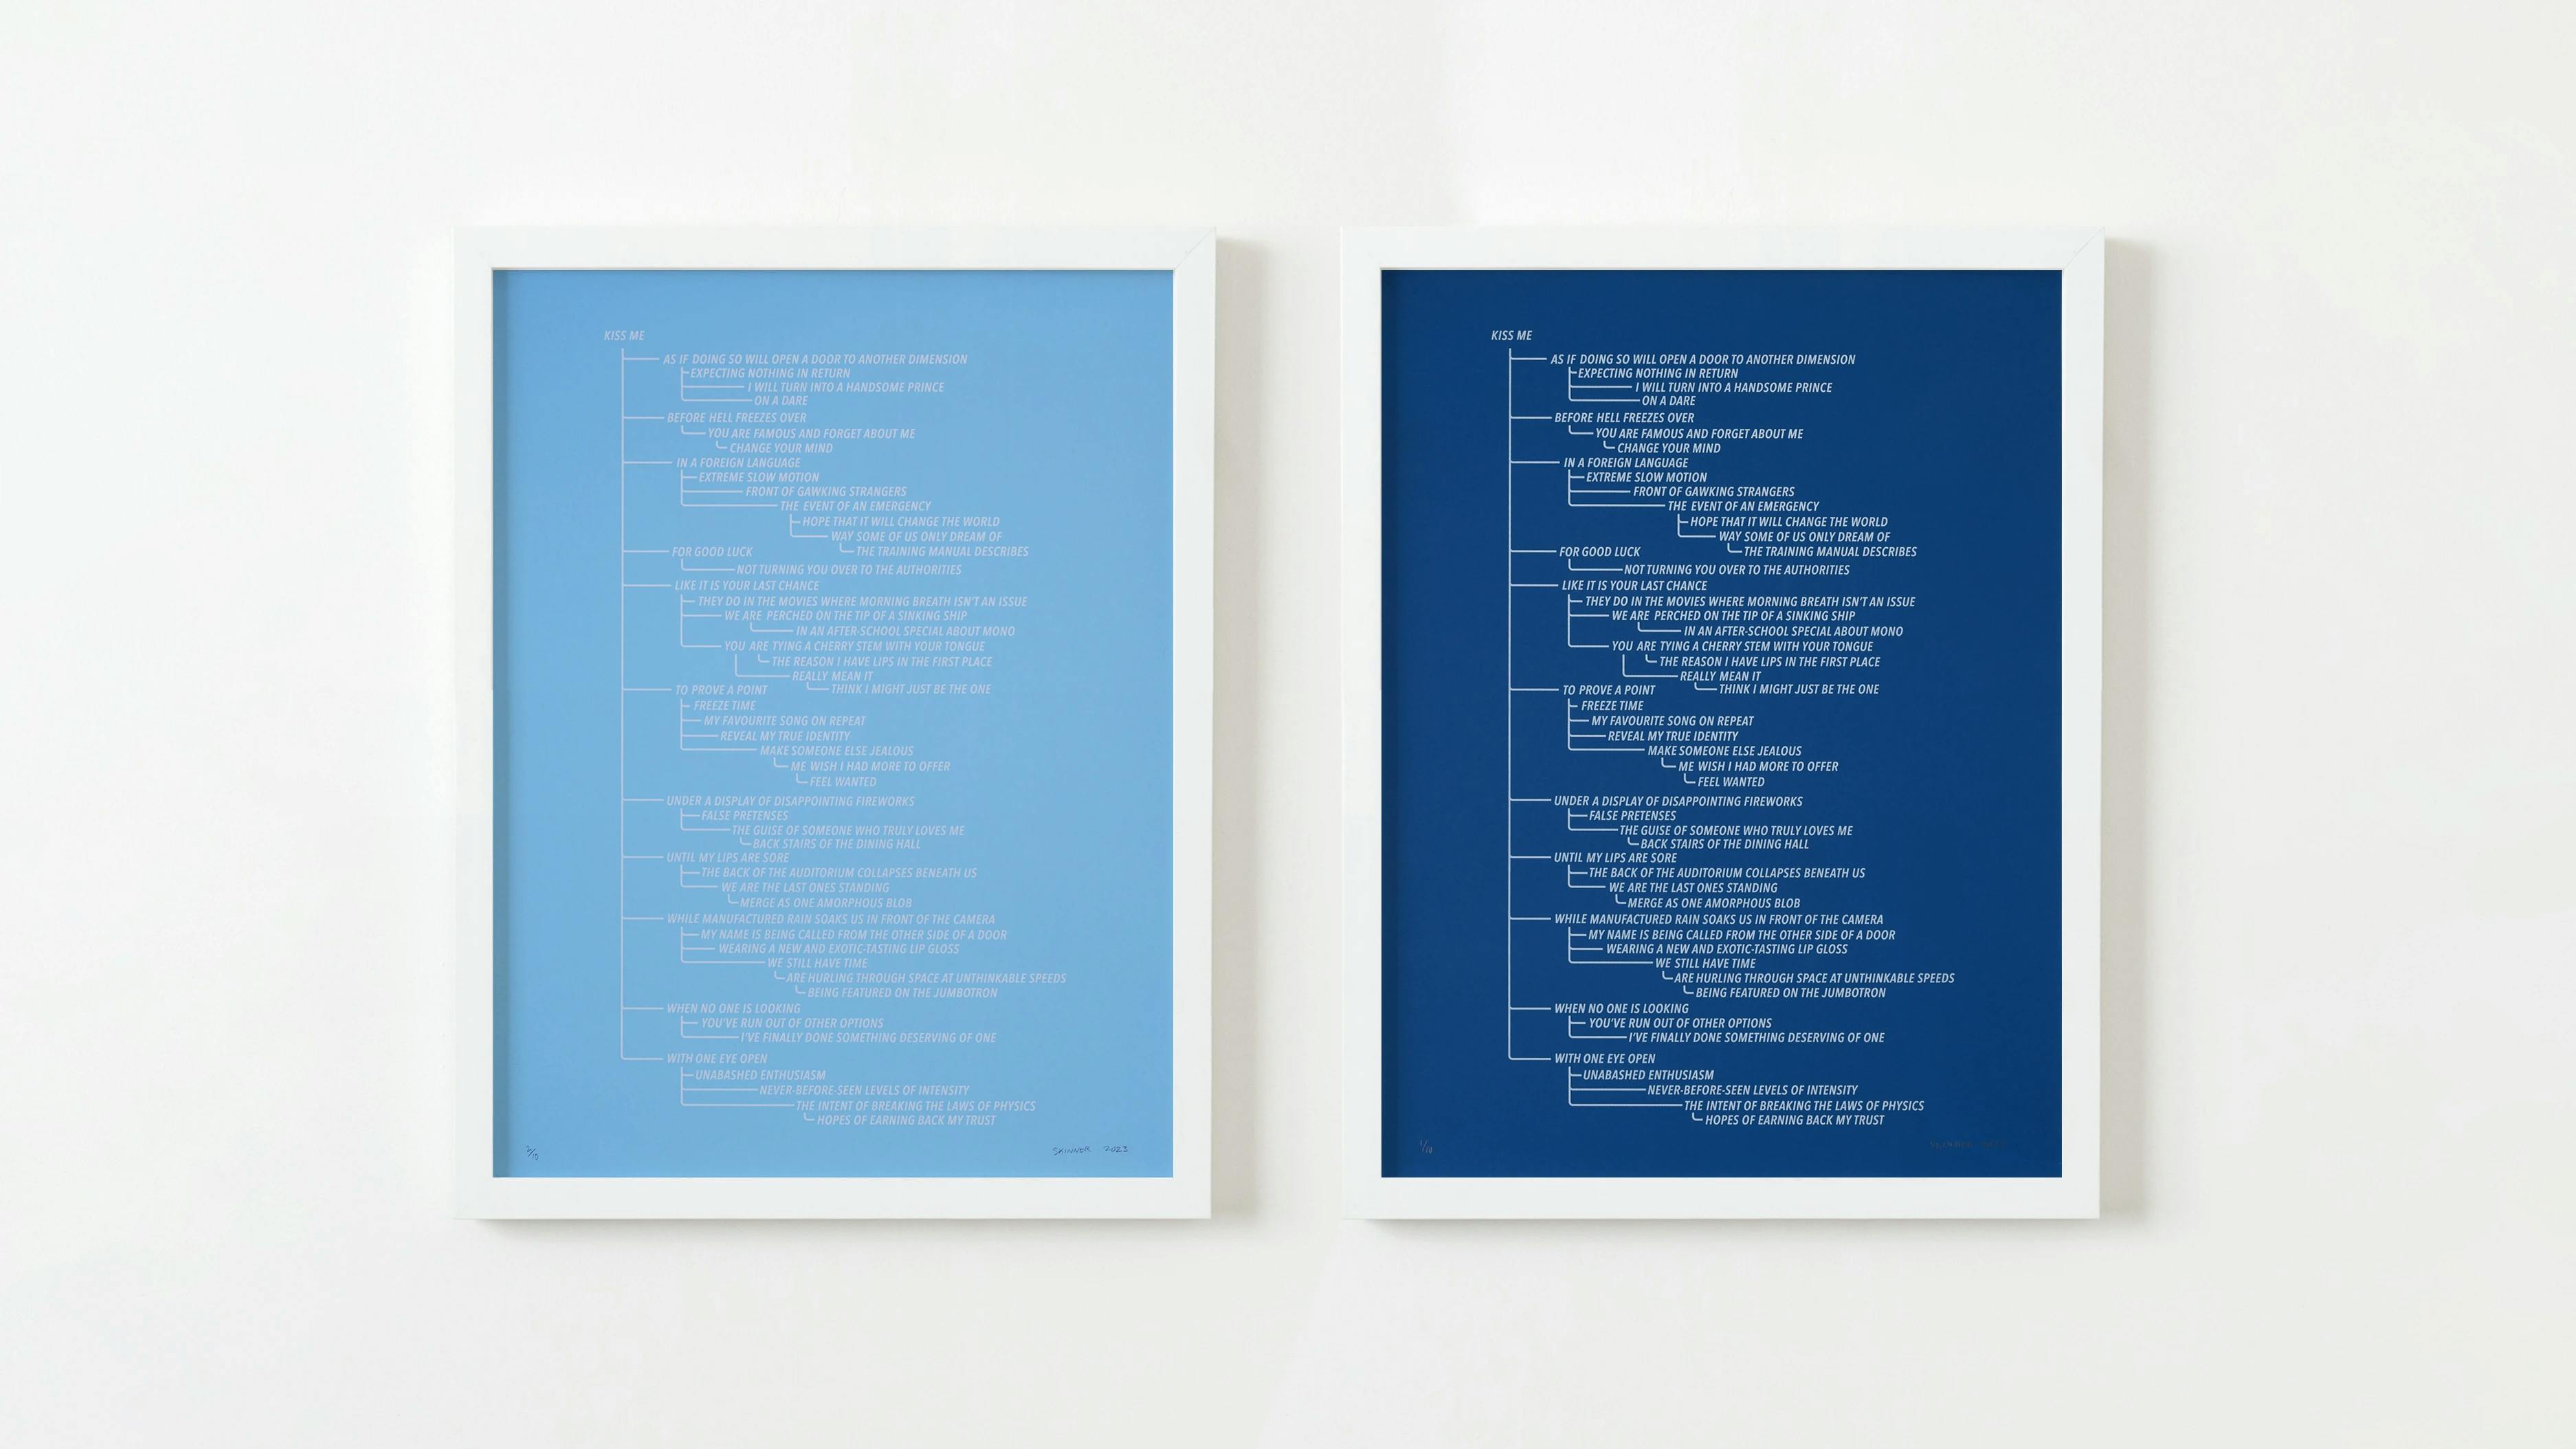 Two framed blue screen prints by Ben Skinner, part of our off-registry tips.